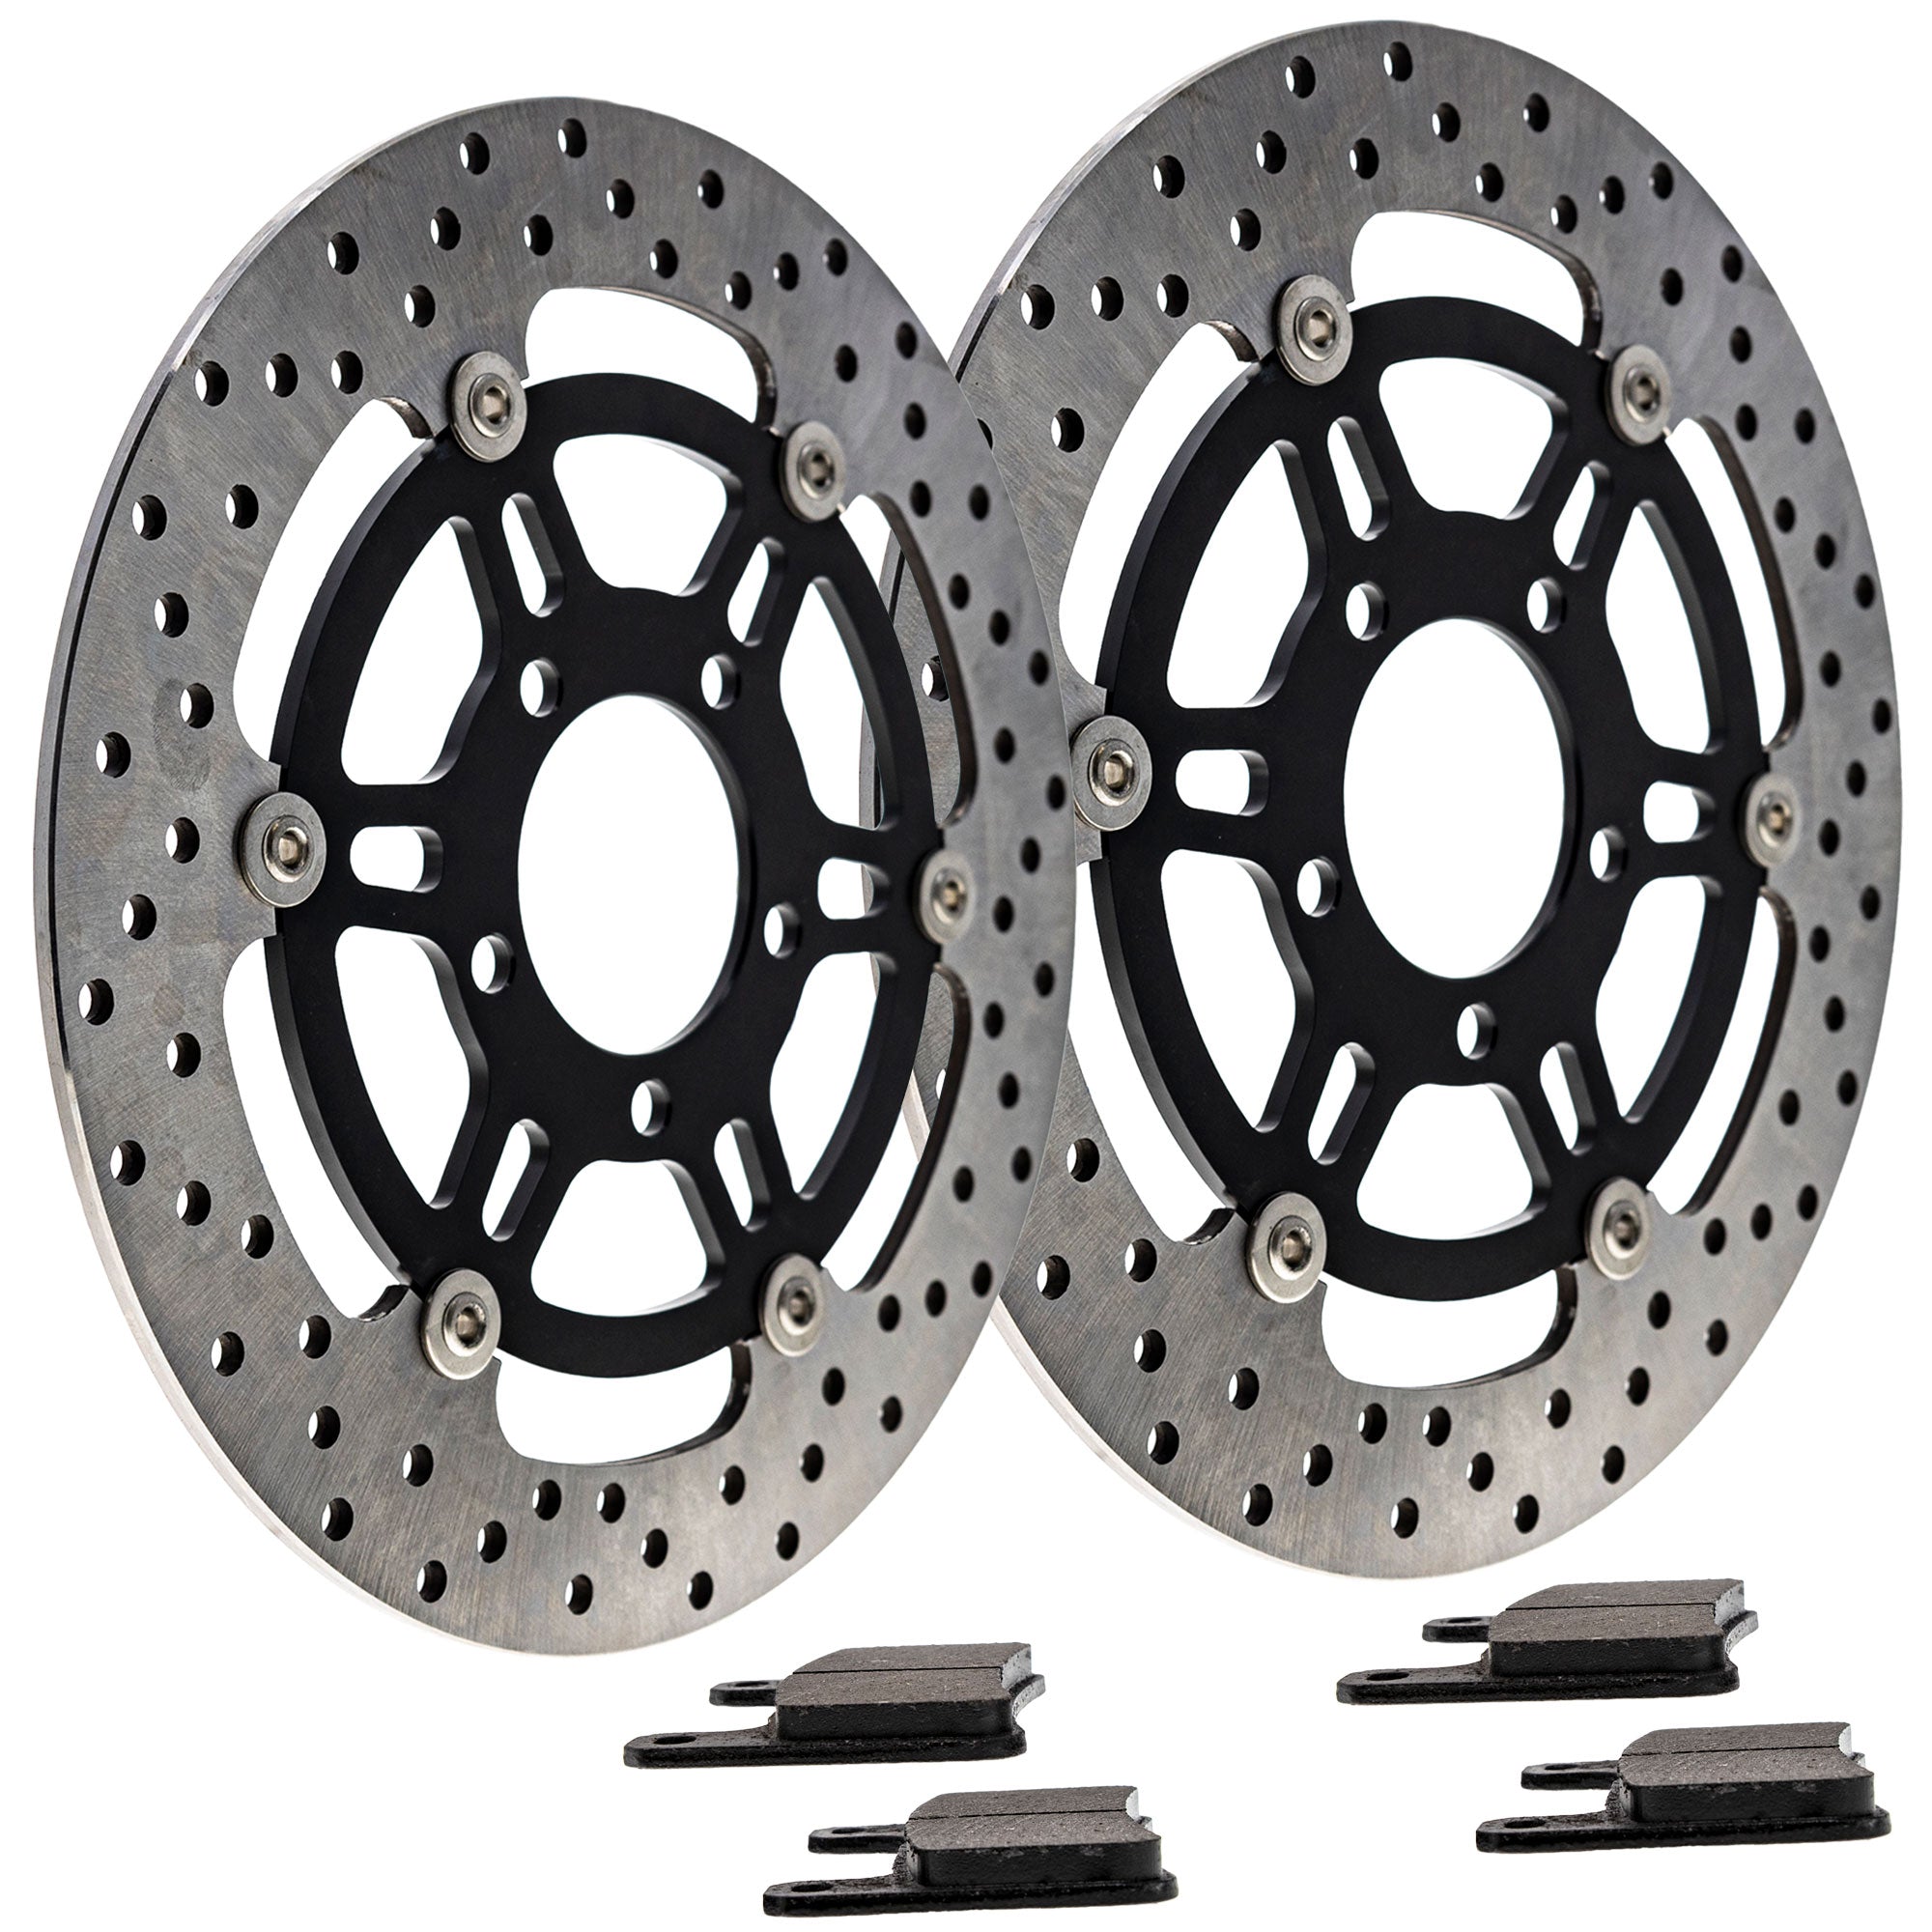 Complete Front or Rear Pad and Rotor Set for zOTHER Kawasaki GSXR750X GSXR750 GSXR600X NICHE MK1006648